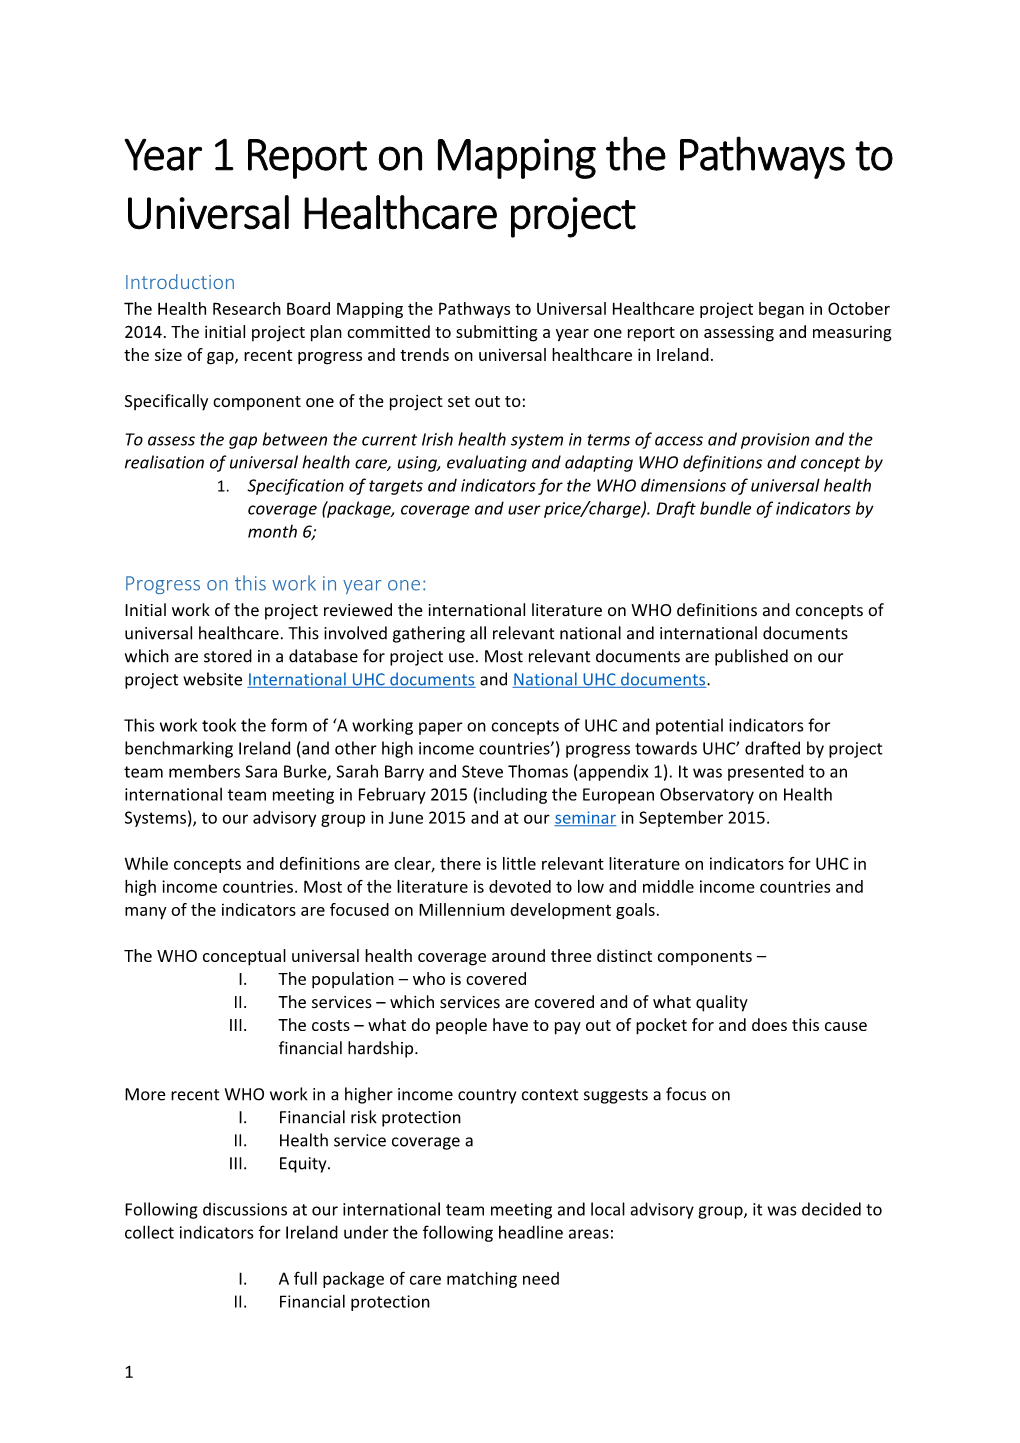 Year 1 Report on Mapping the Pathways to Universal Healthcare Project